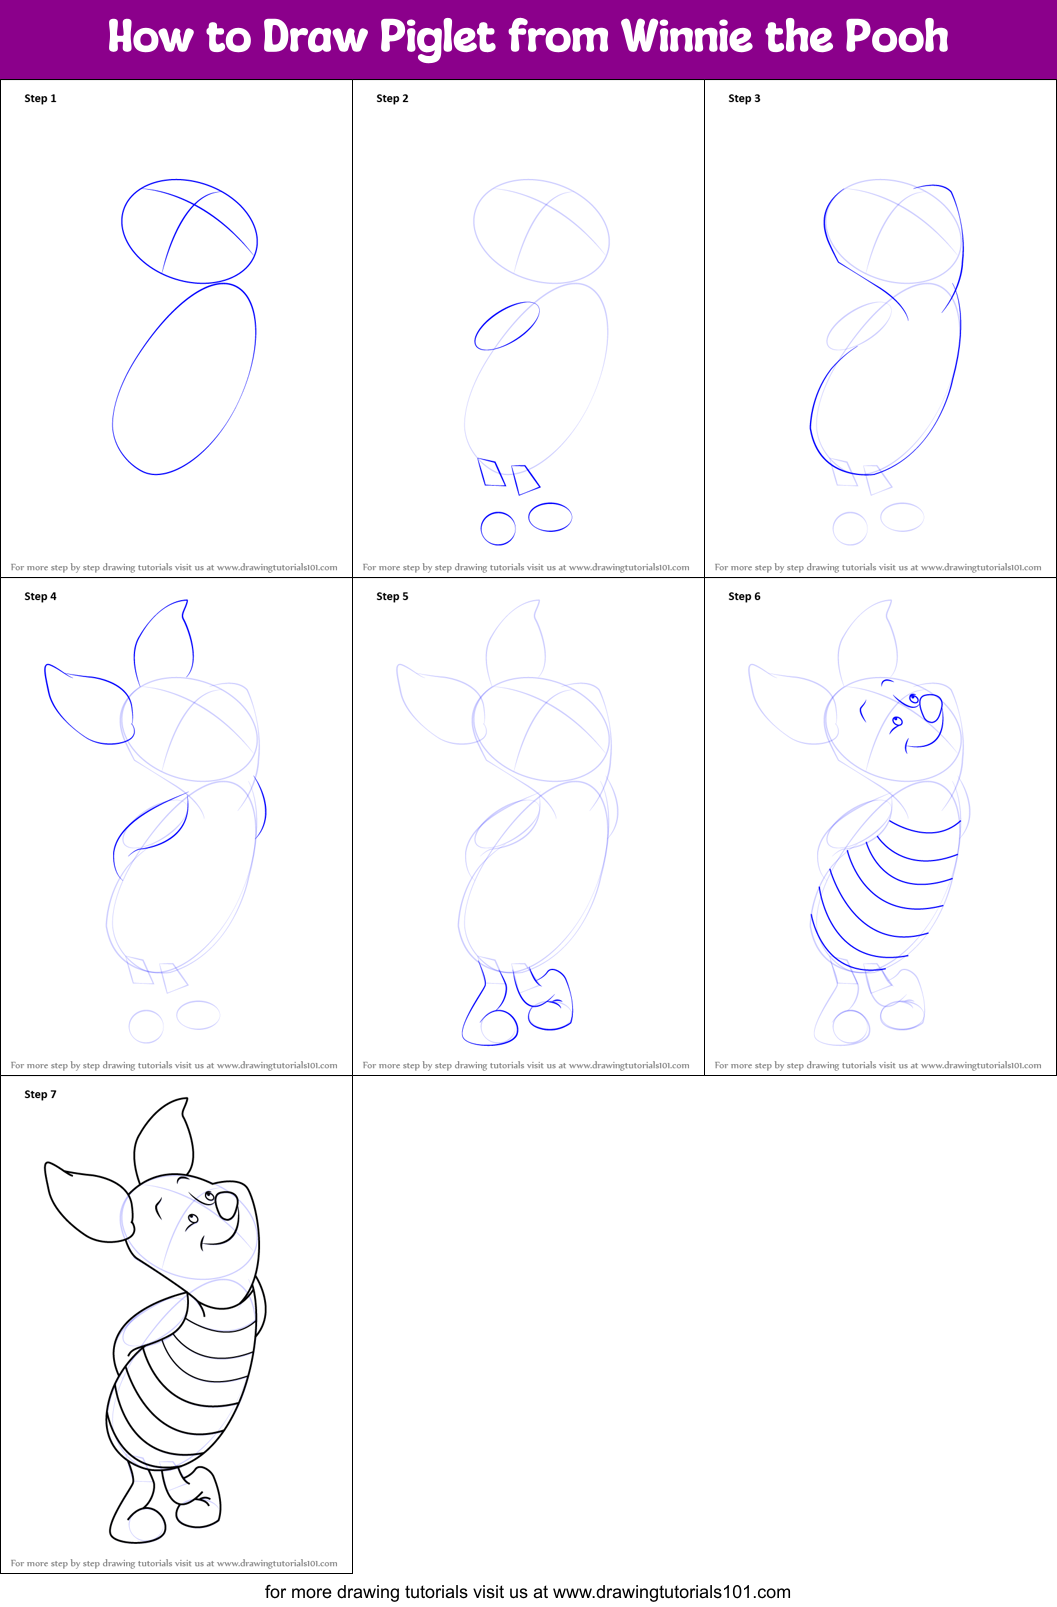 How to Draw Winnie the Pooh VIDEO & Step-by-Step Pictures